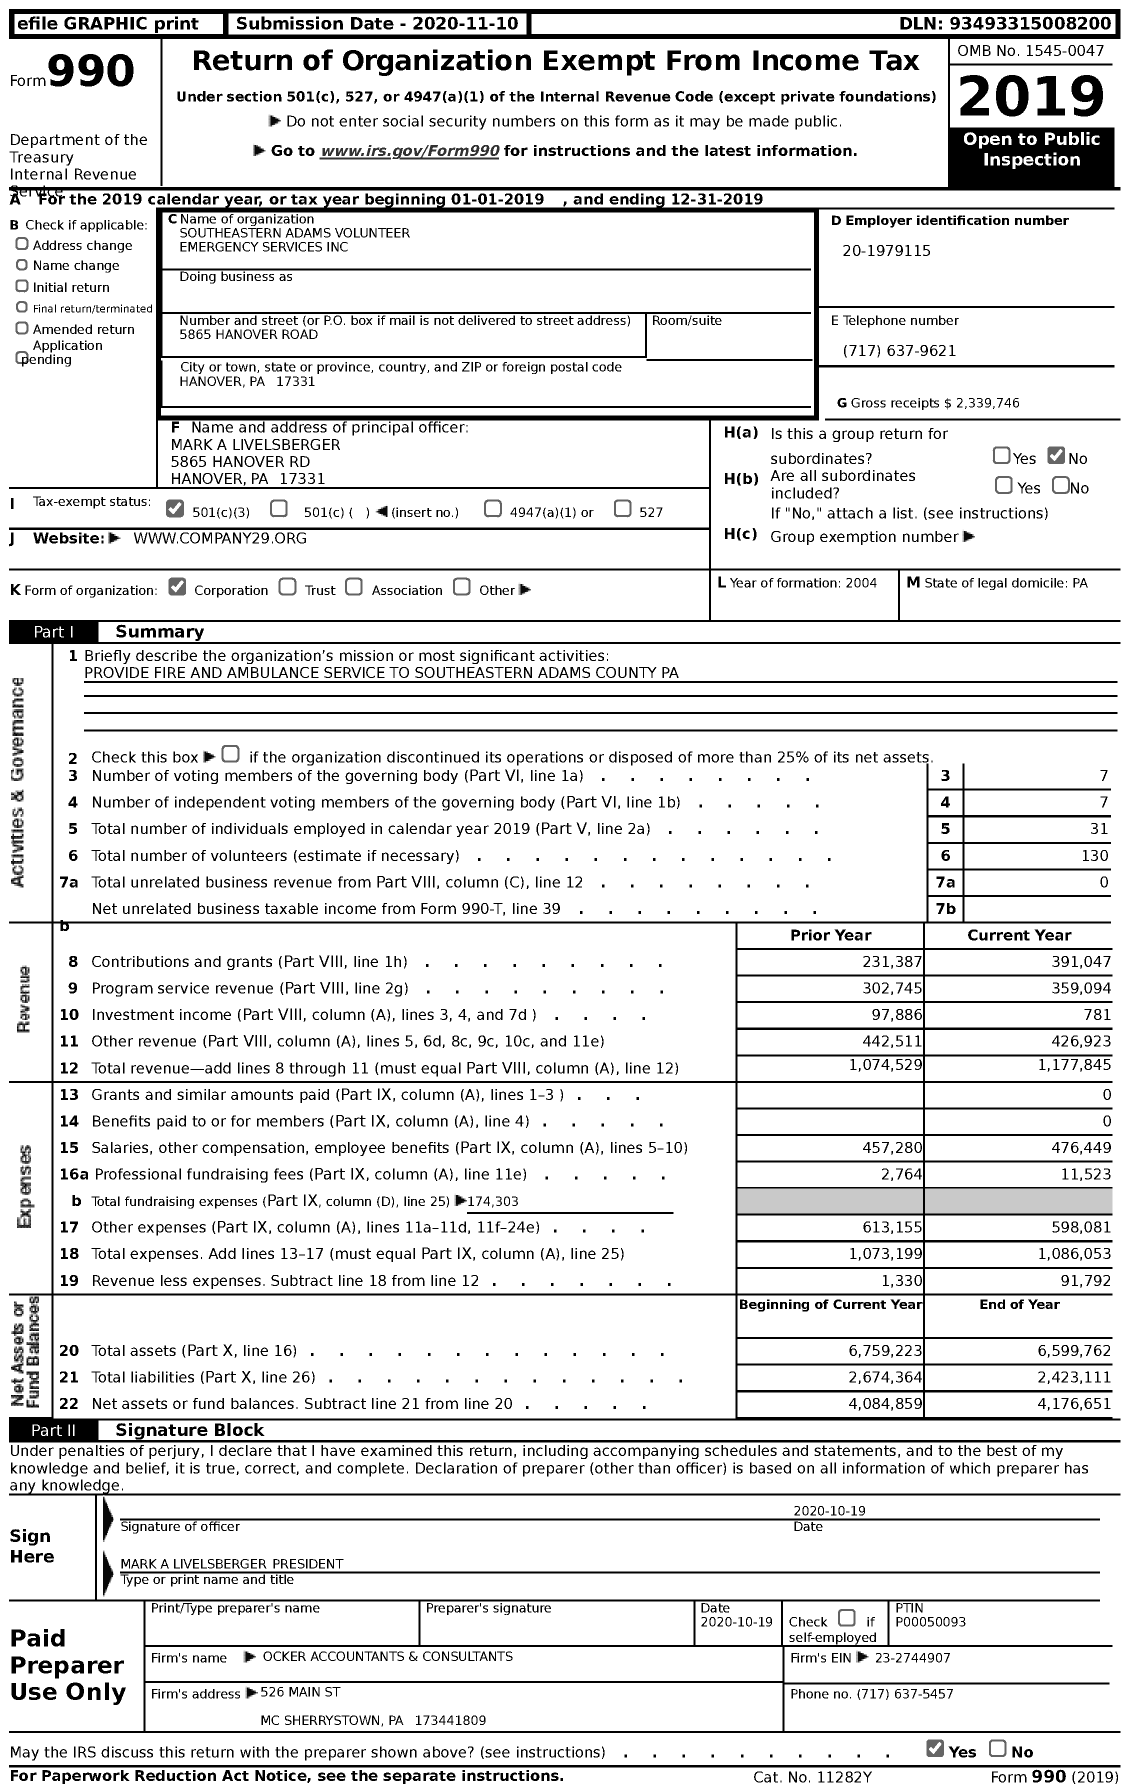 Image of first page of 2019 Form 990 for Southeastern Adams Volunteer Emergency Services (SAVES)